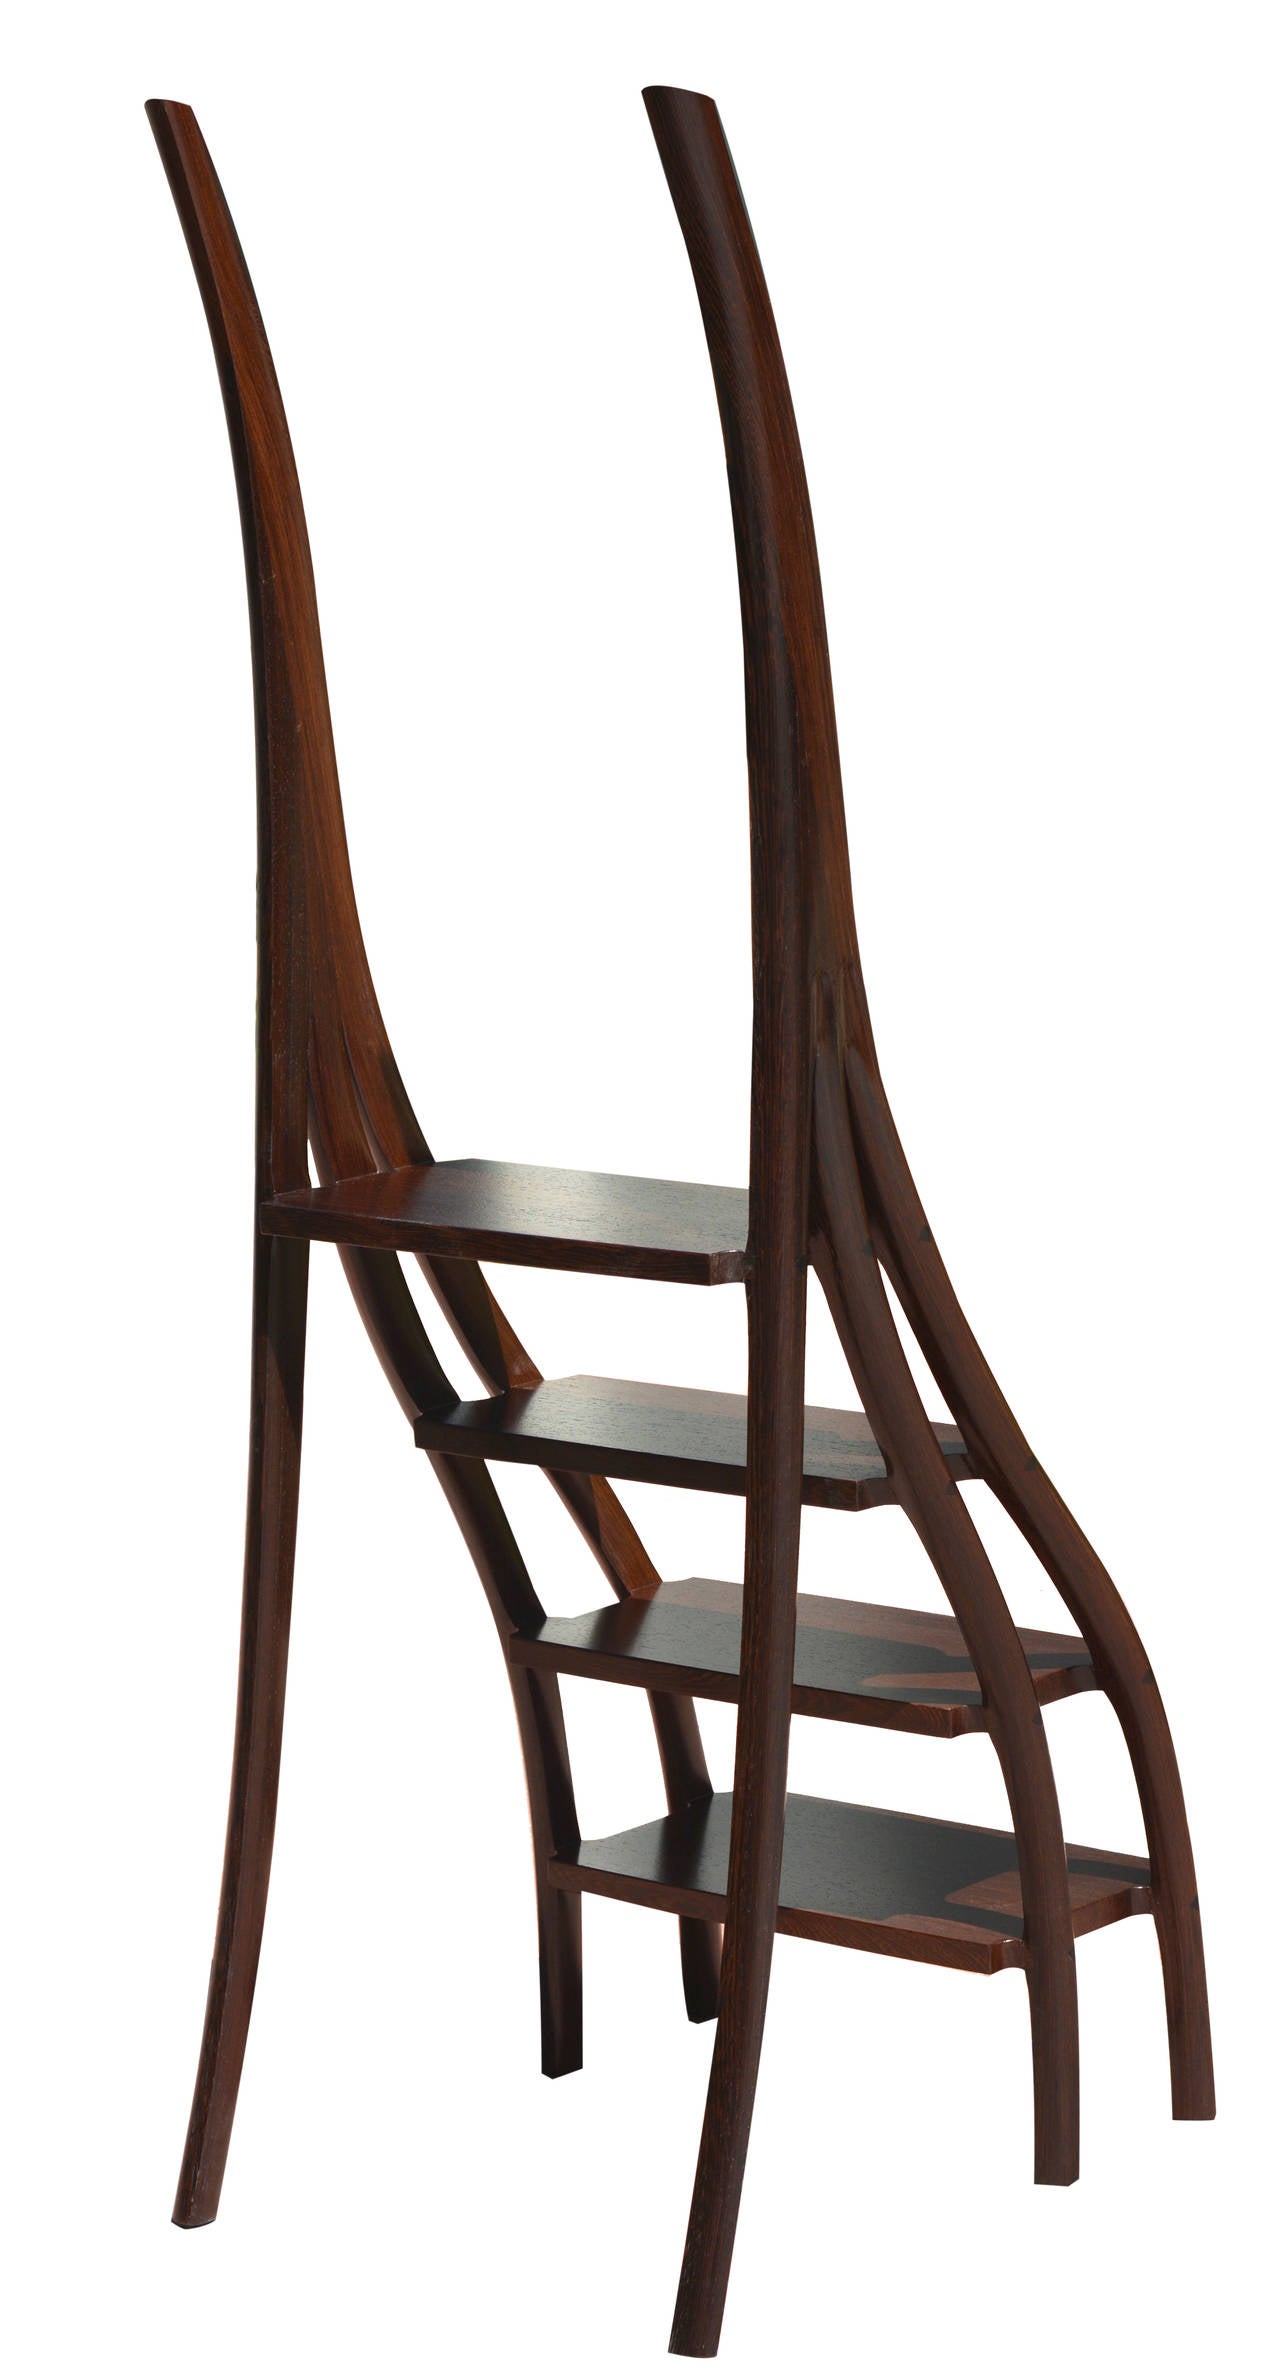 New design by David Ebner. An elegant and functional sculpture by the master craftsman and designer.  An exquisite form, made by one of the best and most talented craftsman of the Studio Furniture Movement - in rich and beautiful Wenge. See page 143